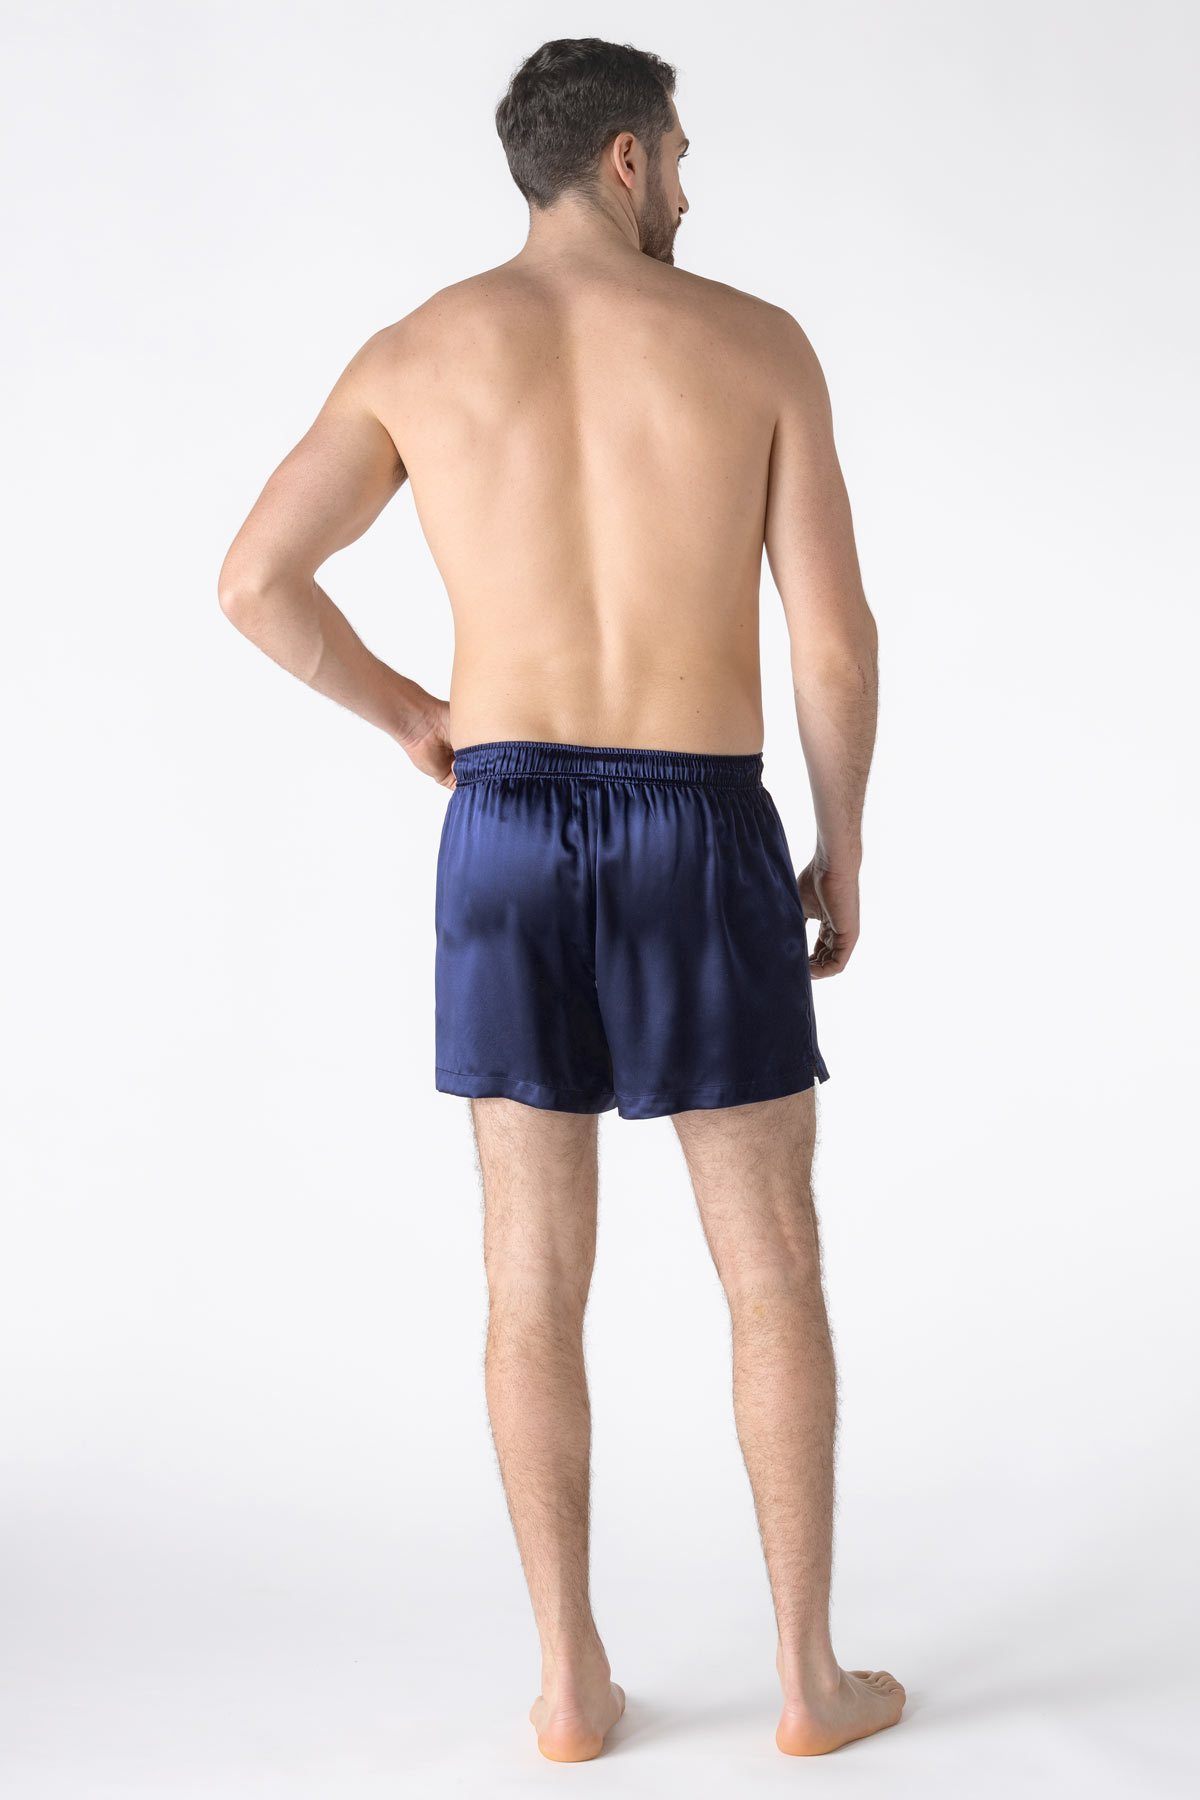 100% SILK BOXERS – Expect Lace